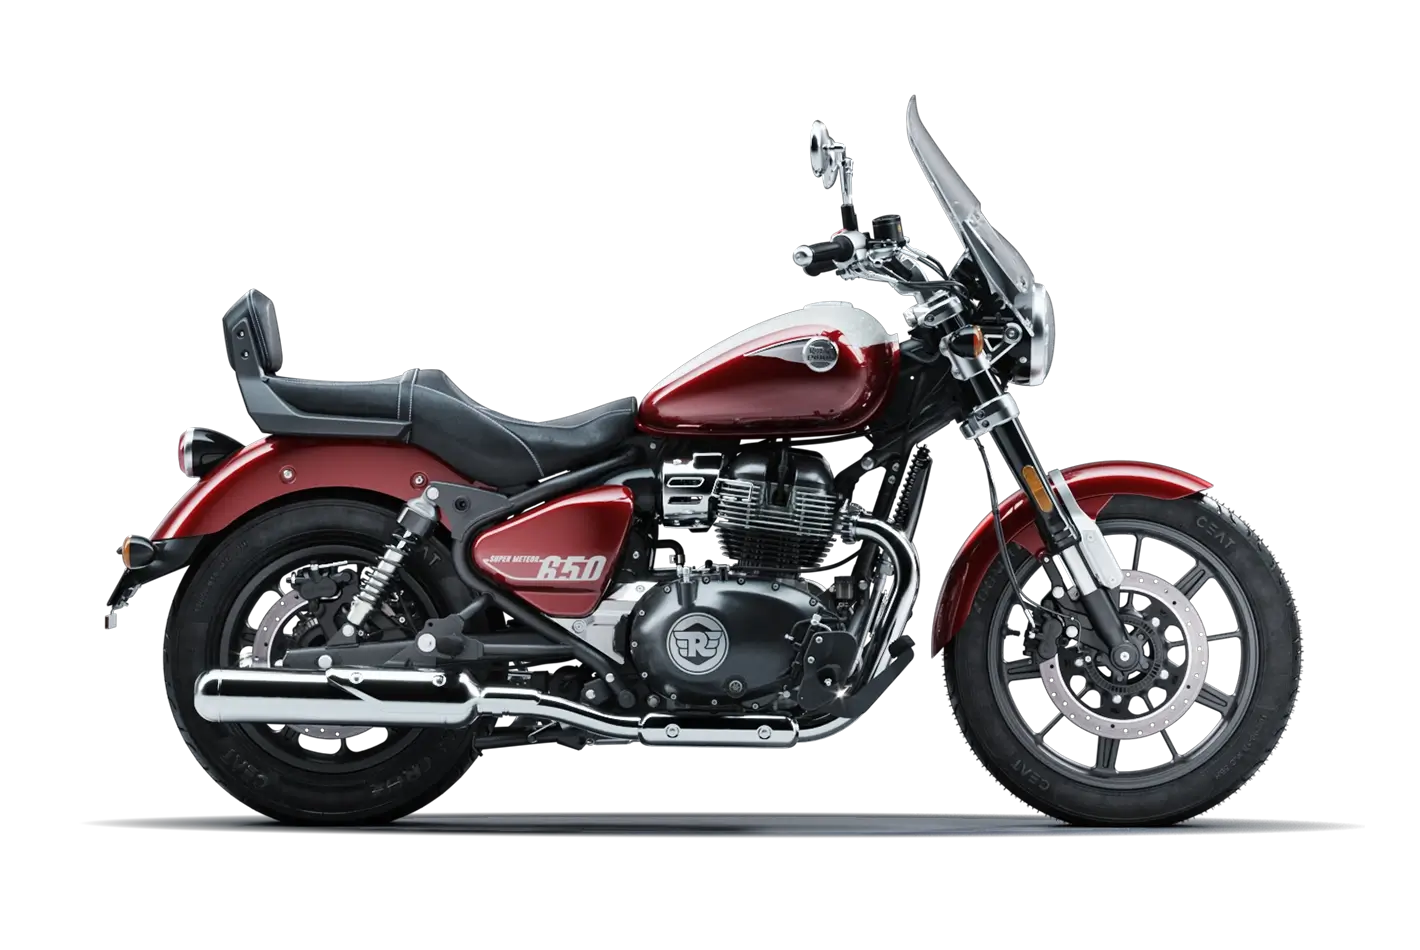 Super Meteor 650 Price, Mileage & Colours in India | Royal Enfield